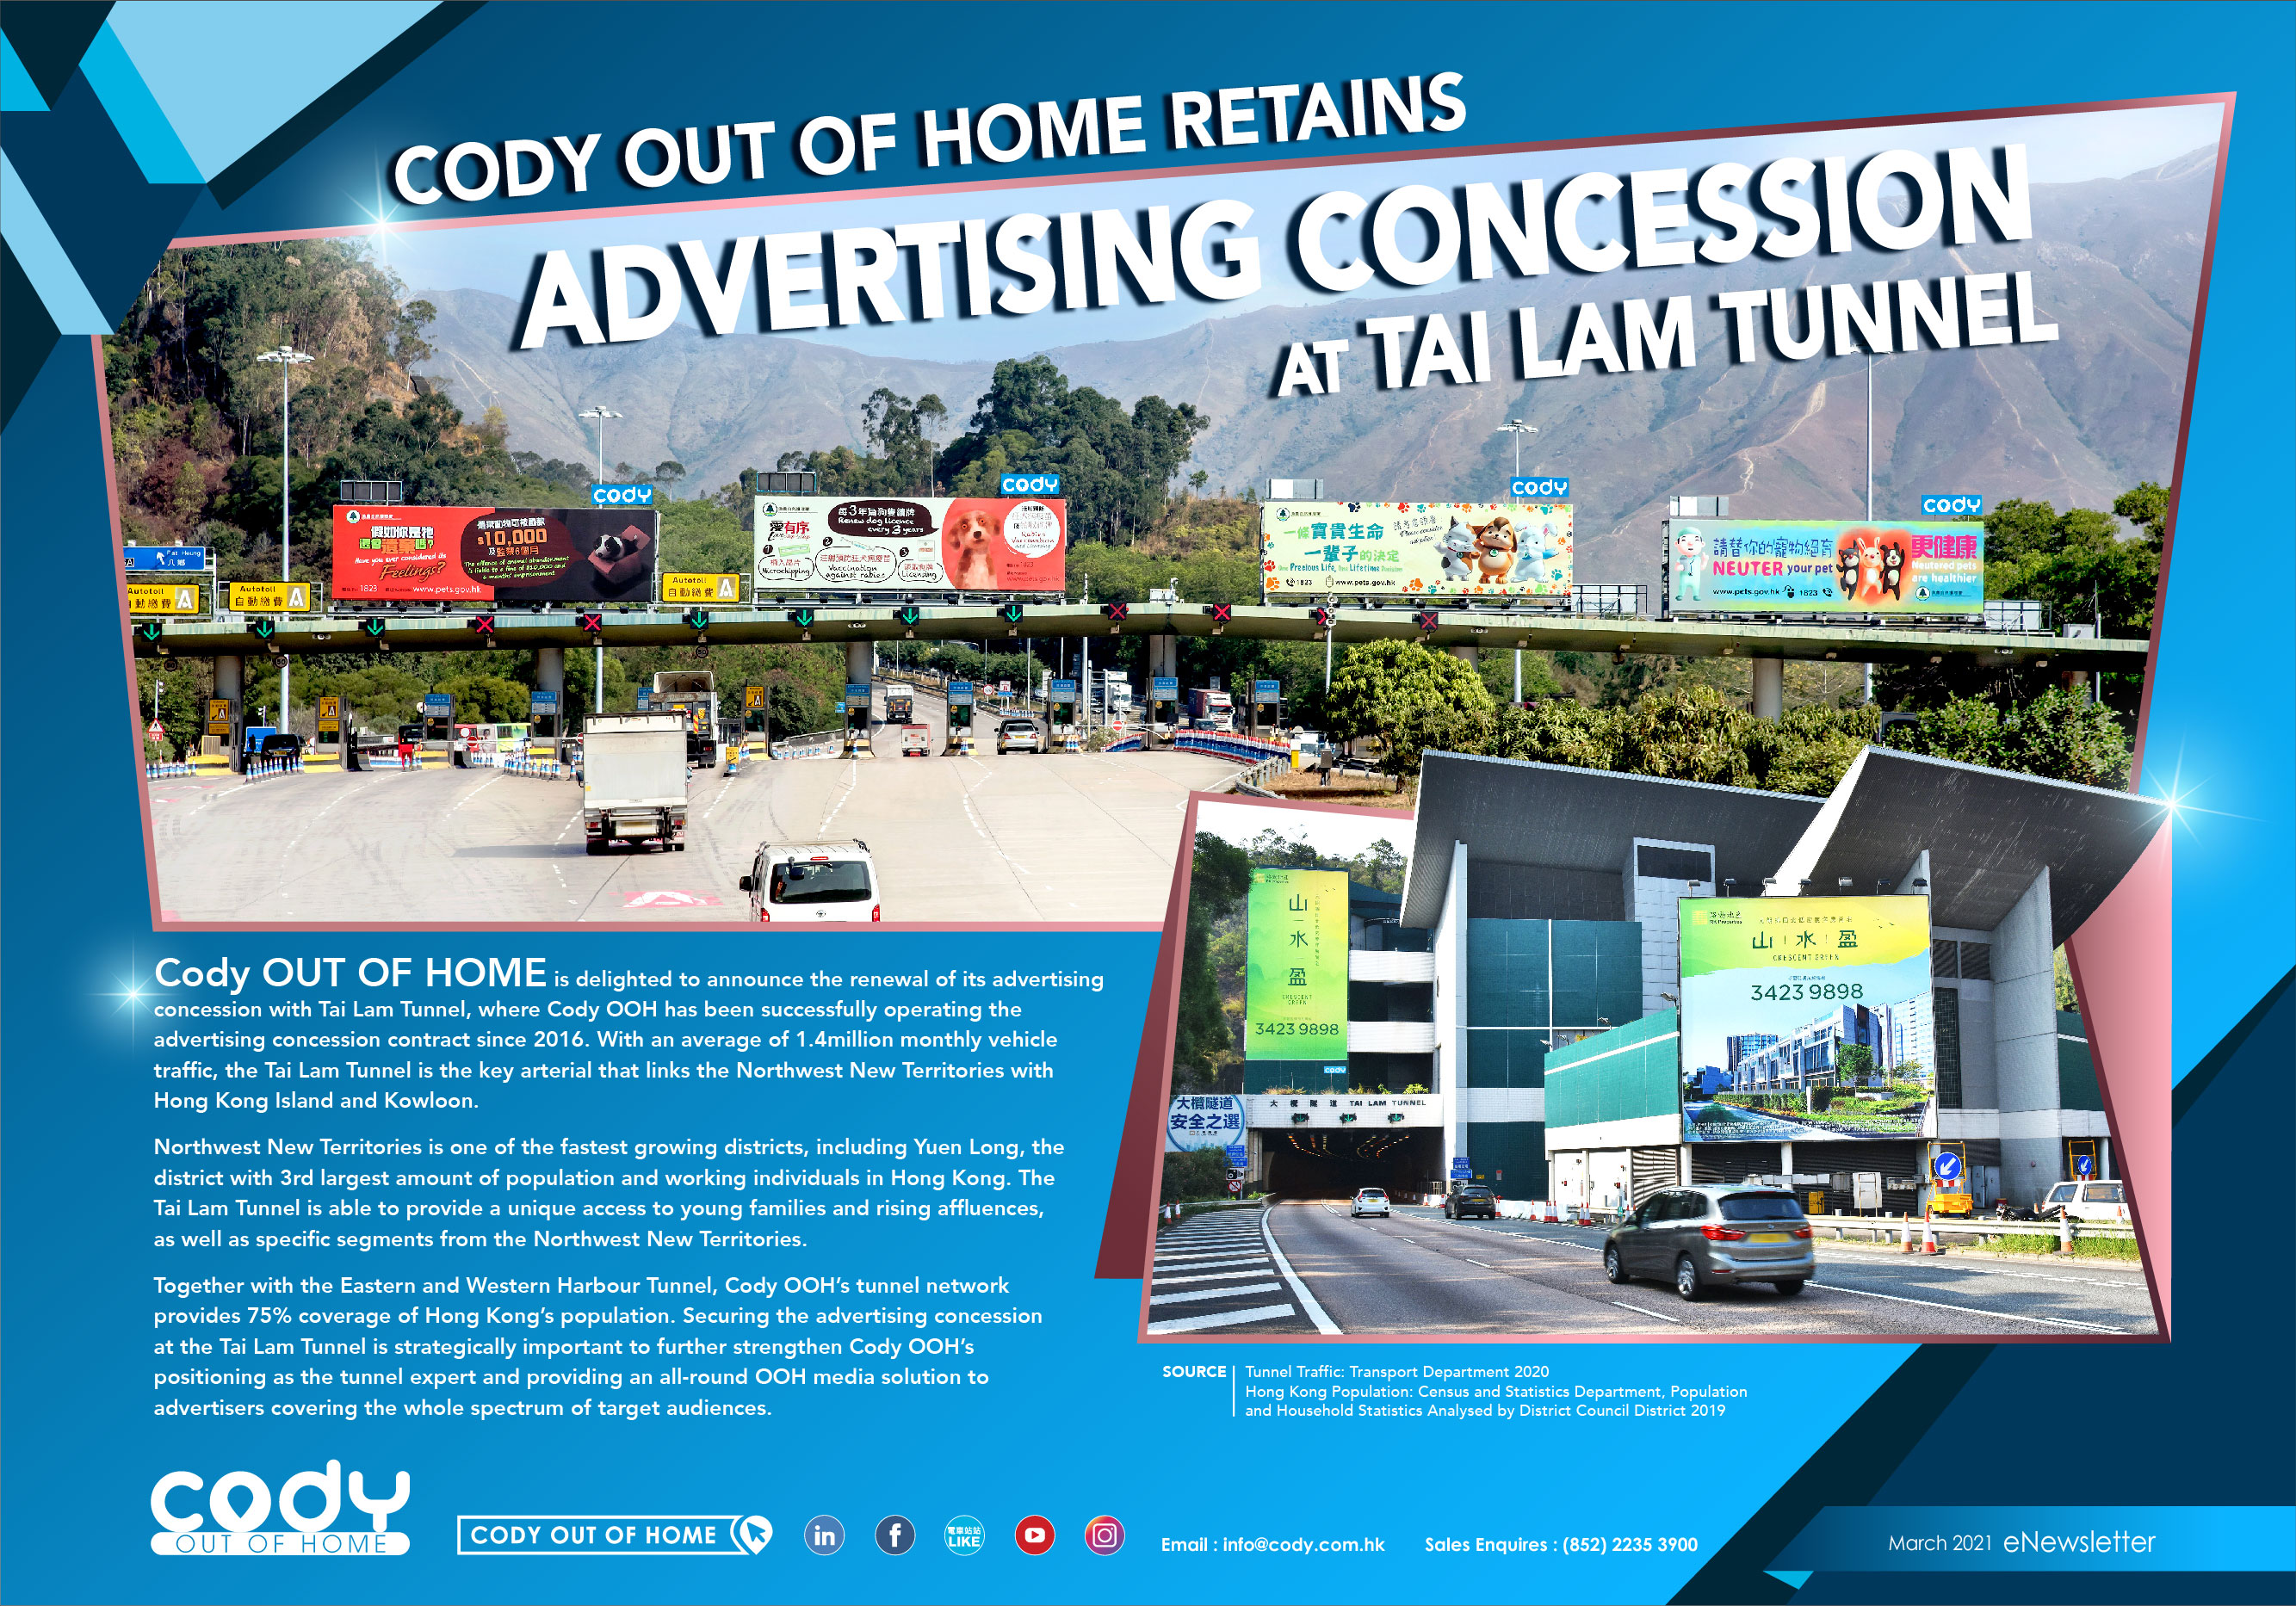 cody out of home retains advertising concession at tai lam